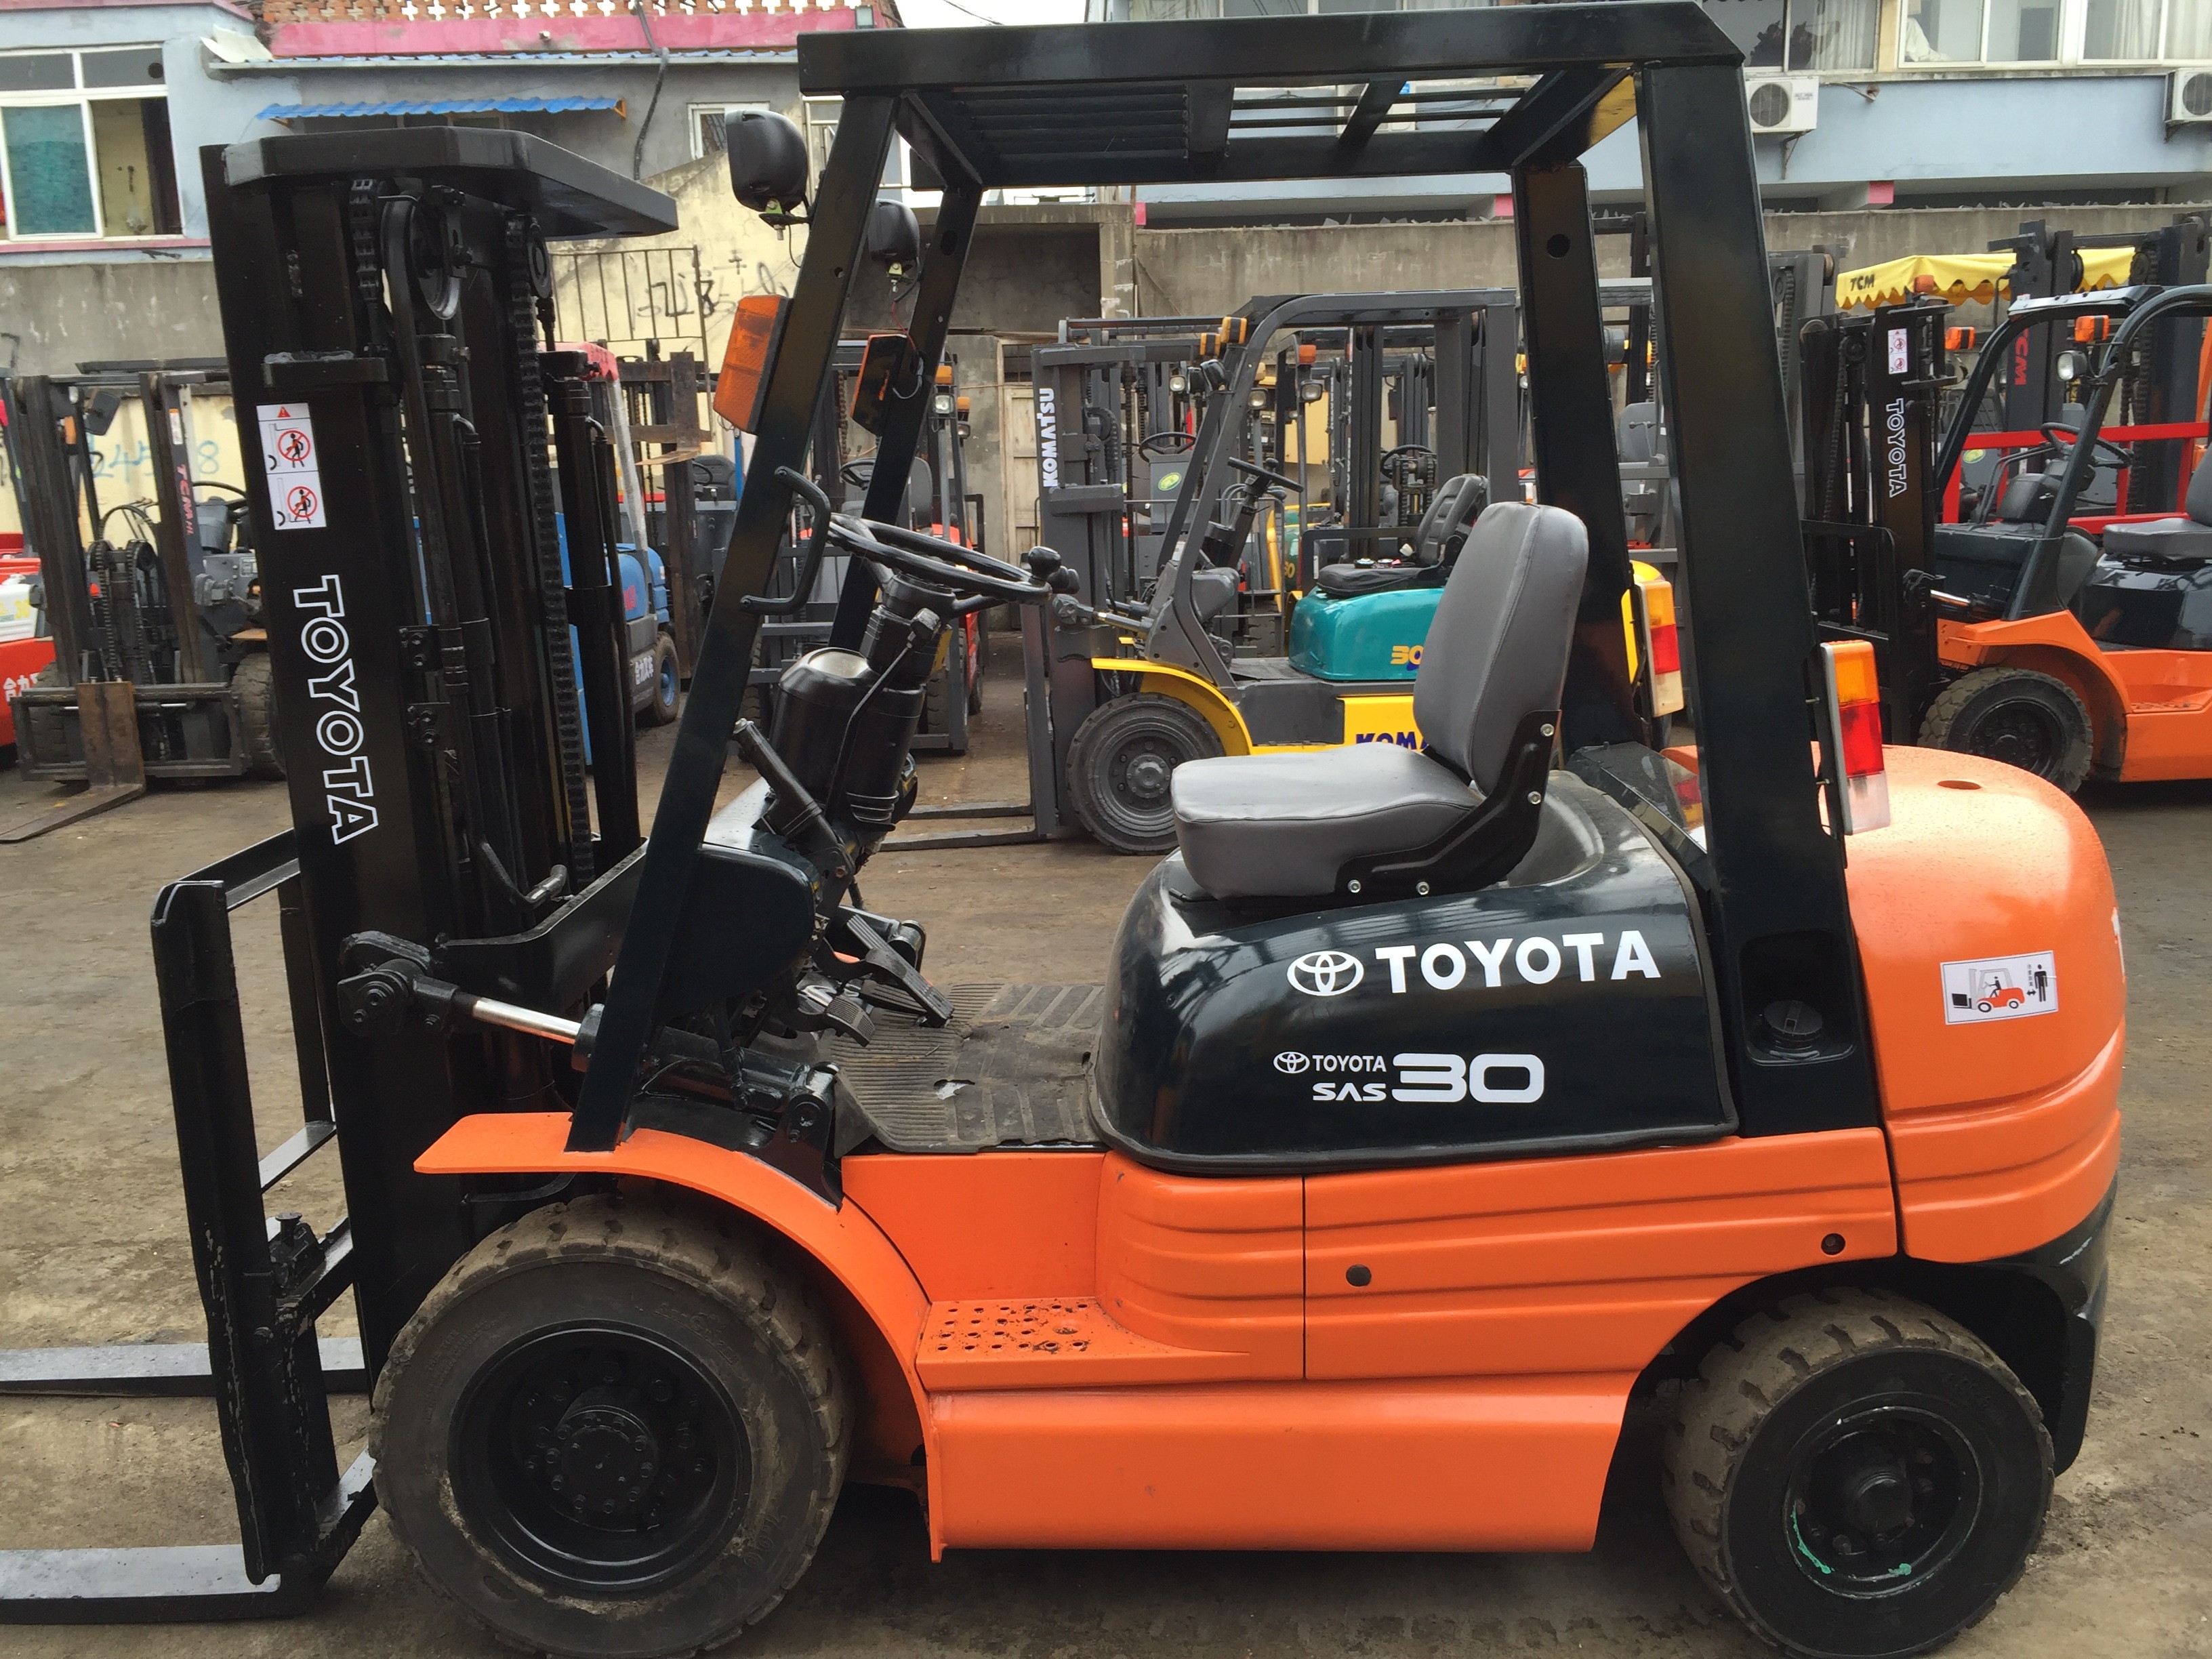 Quality Used Second Hand TCM Mitsubishi Komatsu TOYOTA YTO Forklift in Good Condition for Sale for sale